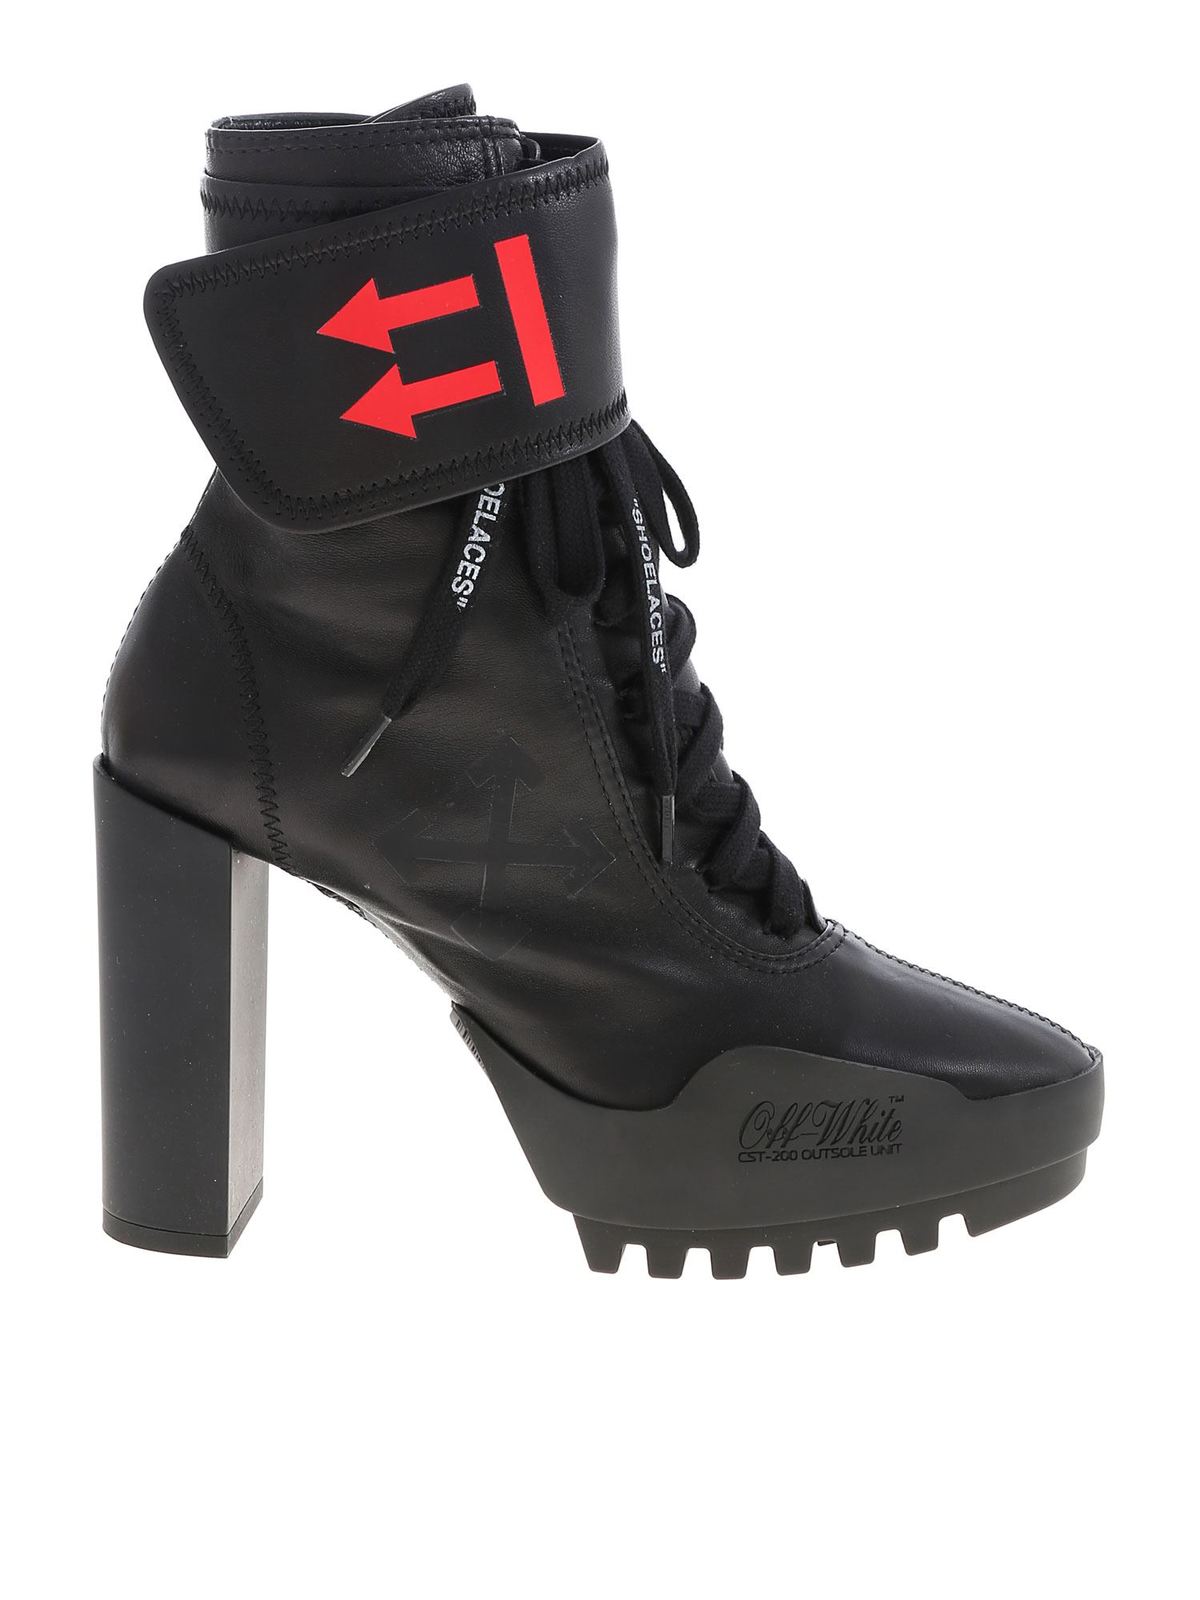 OFF-WHITE HEELED MOTO BOOTS IN BLACK